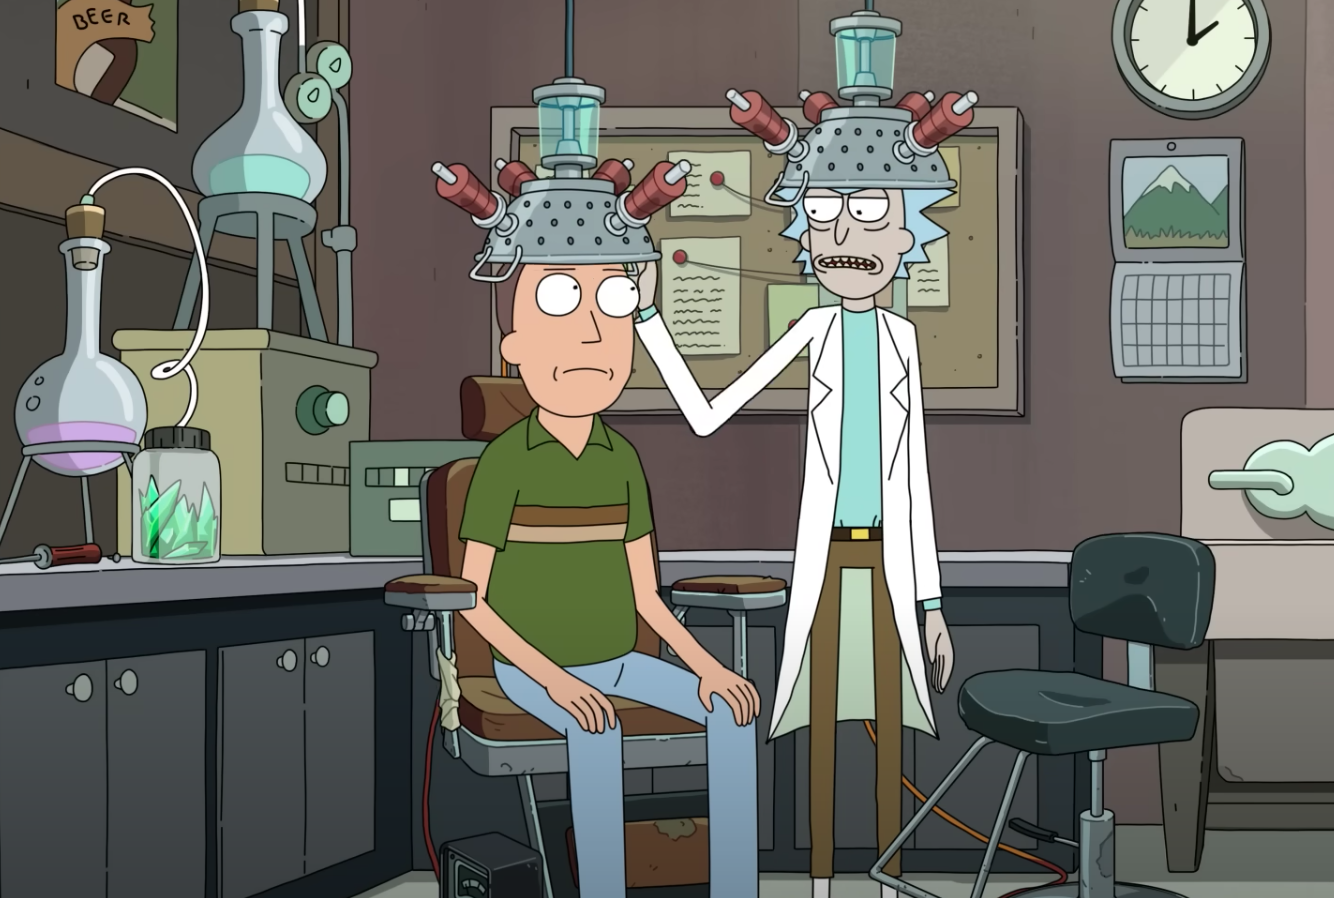 How to watch 'Rick and Morty' Season 6 Episode 3 for free without cable 